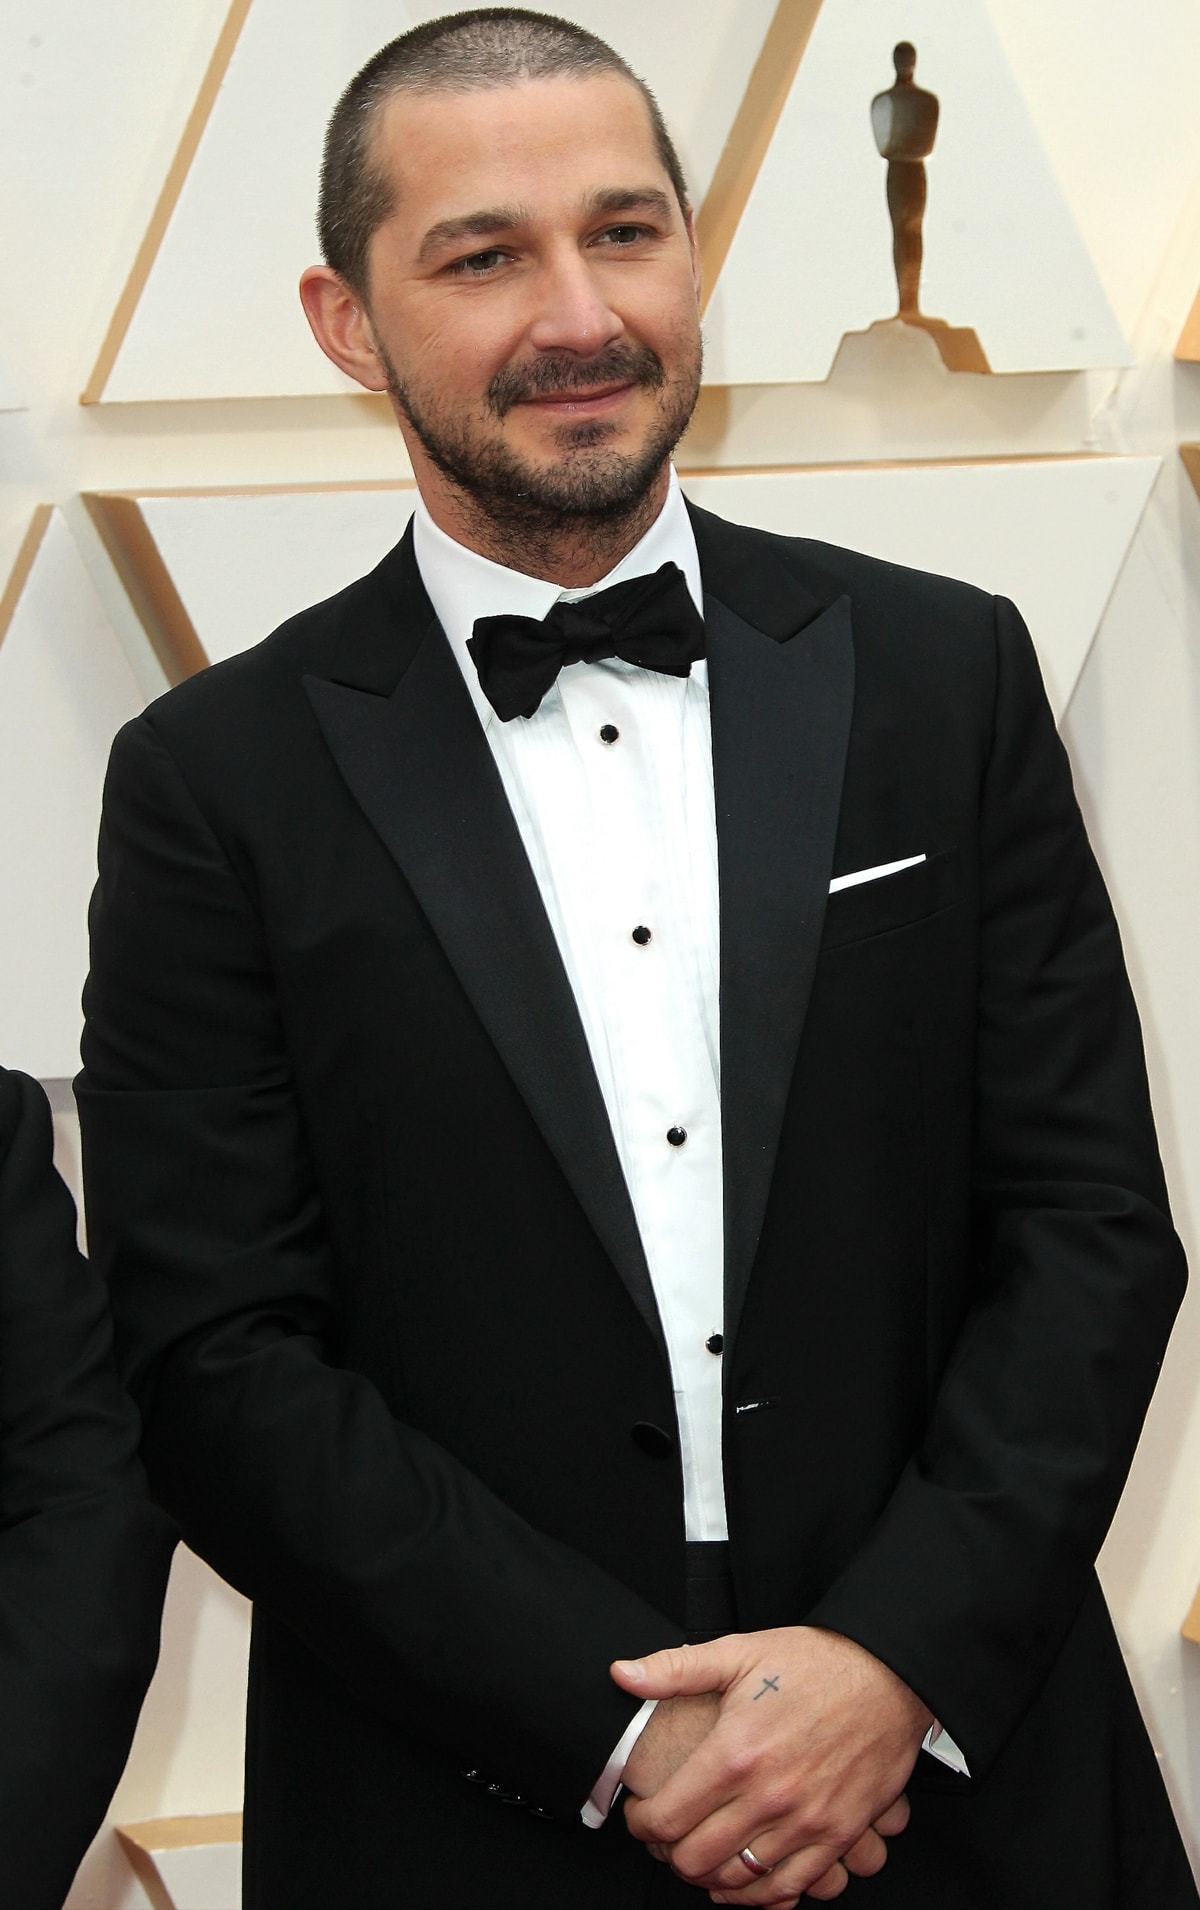 Shia LeBeouf claims he quit "Don't Worry Darling" and Olivia Wilde claims he was replaced